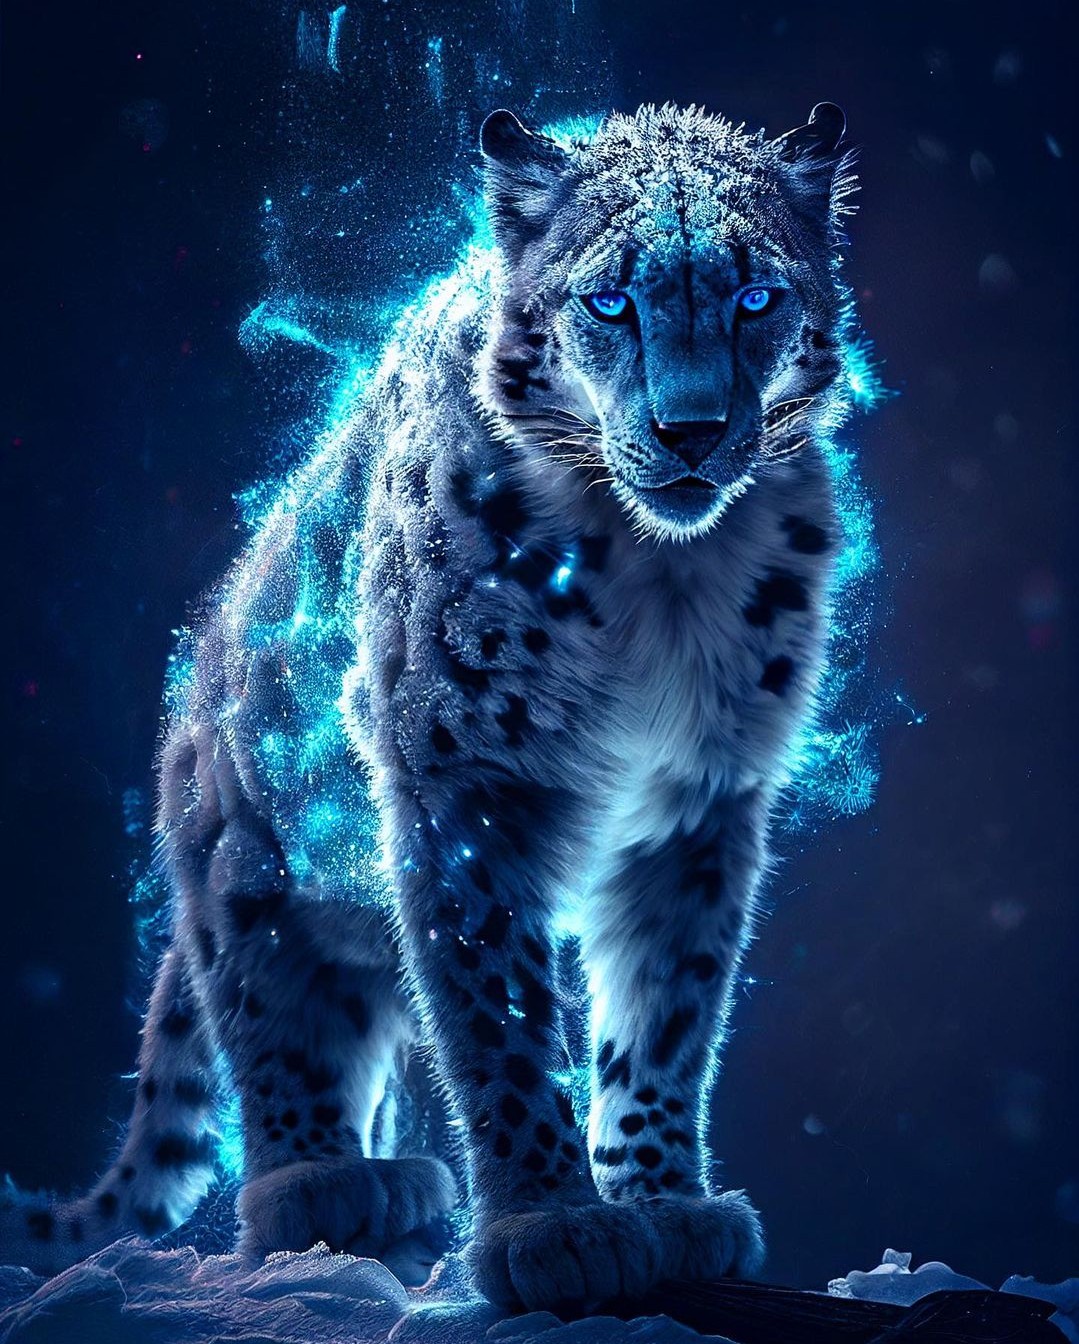 White Tiger Standing Against Our Enemies 3D Comics Painting By ChAudharySAqlain7